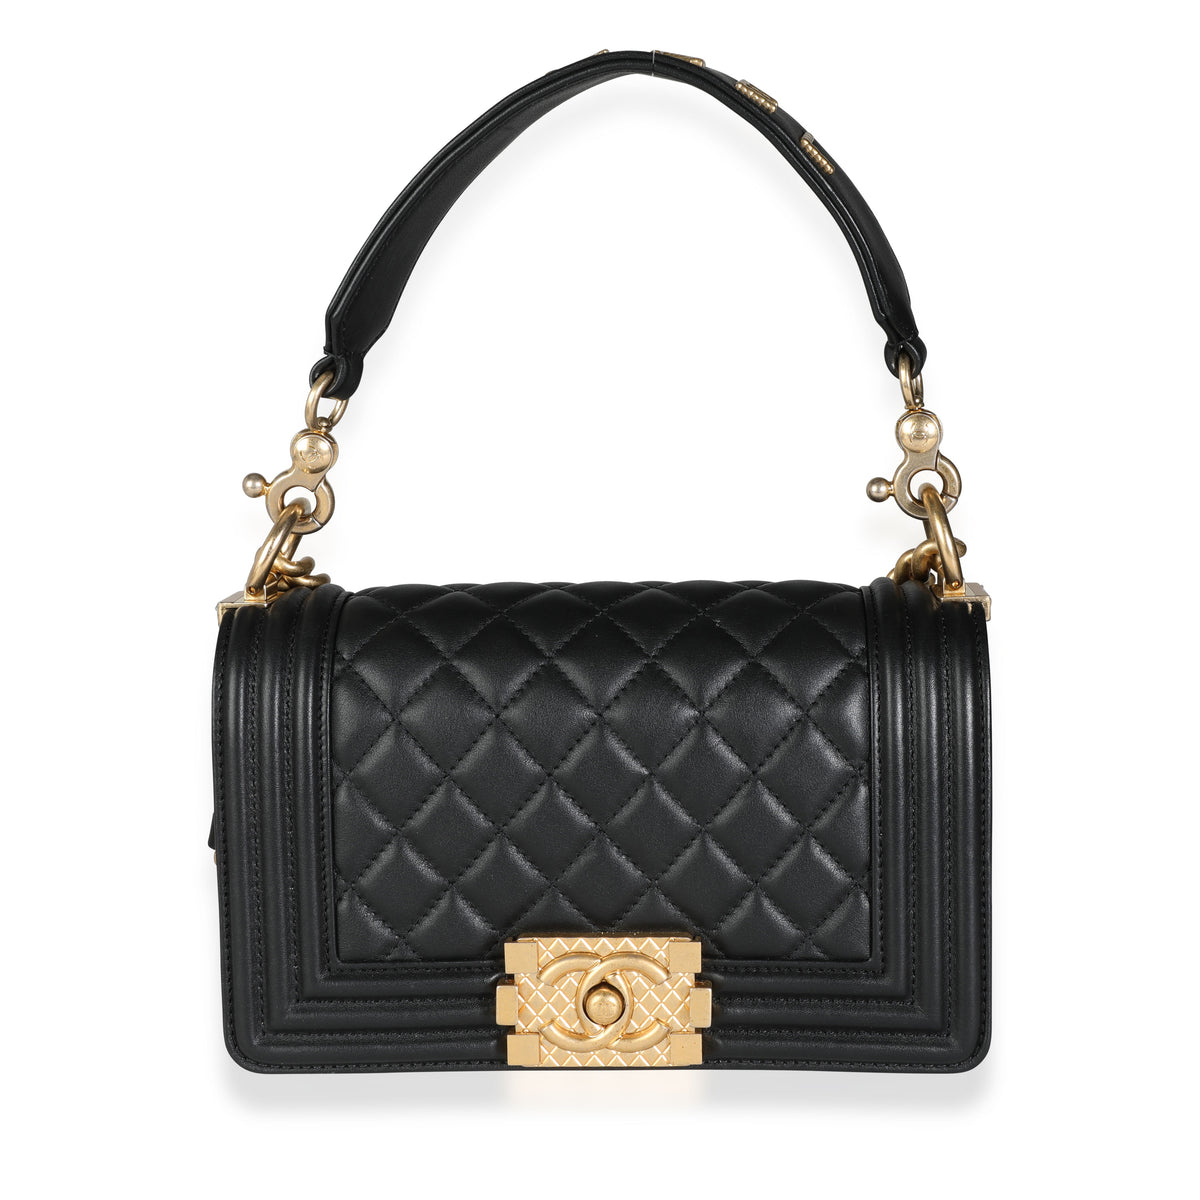 Chanel Paris Quilted Lamb Skin Black Caviar Large Logo Bag Made In Italy